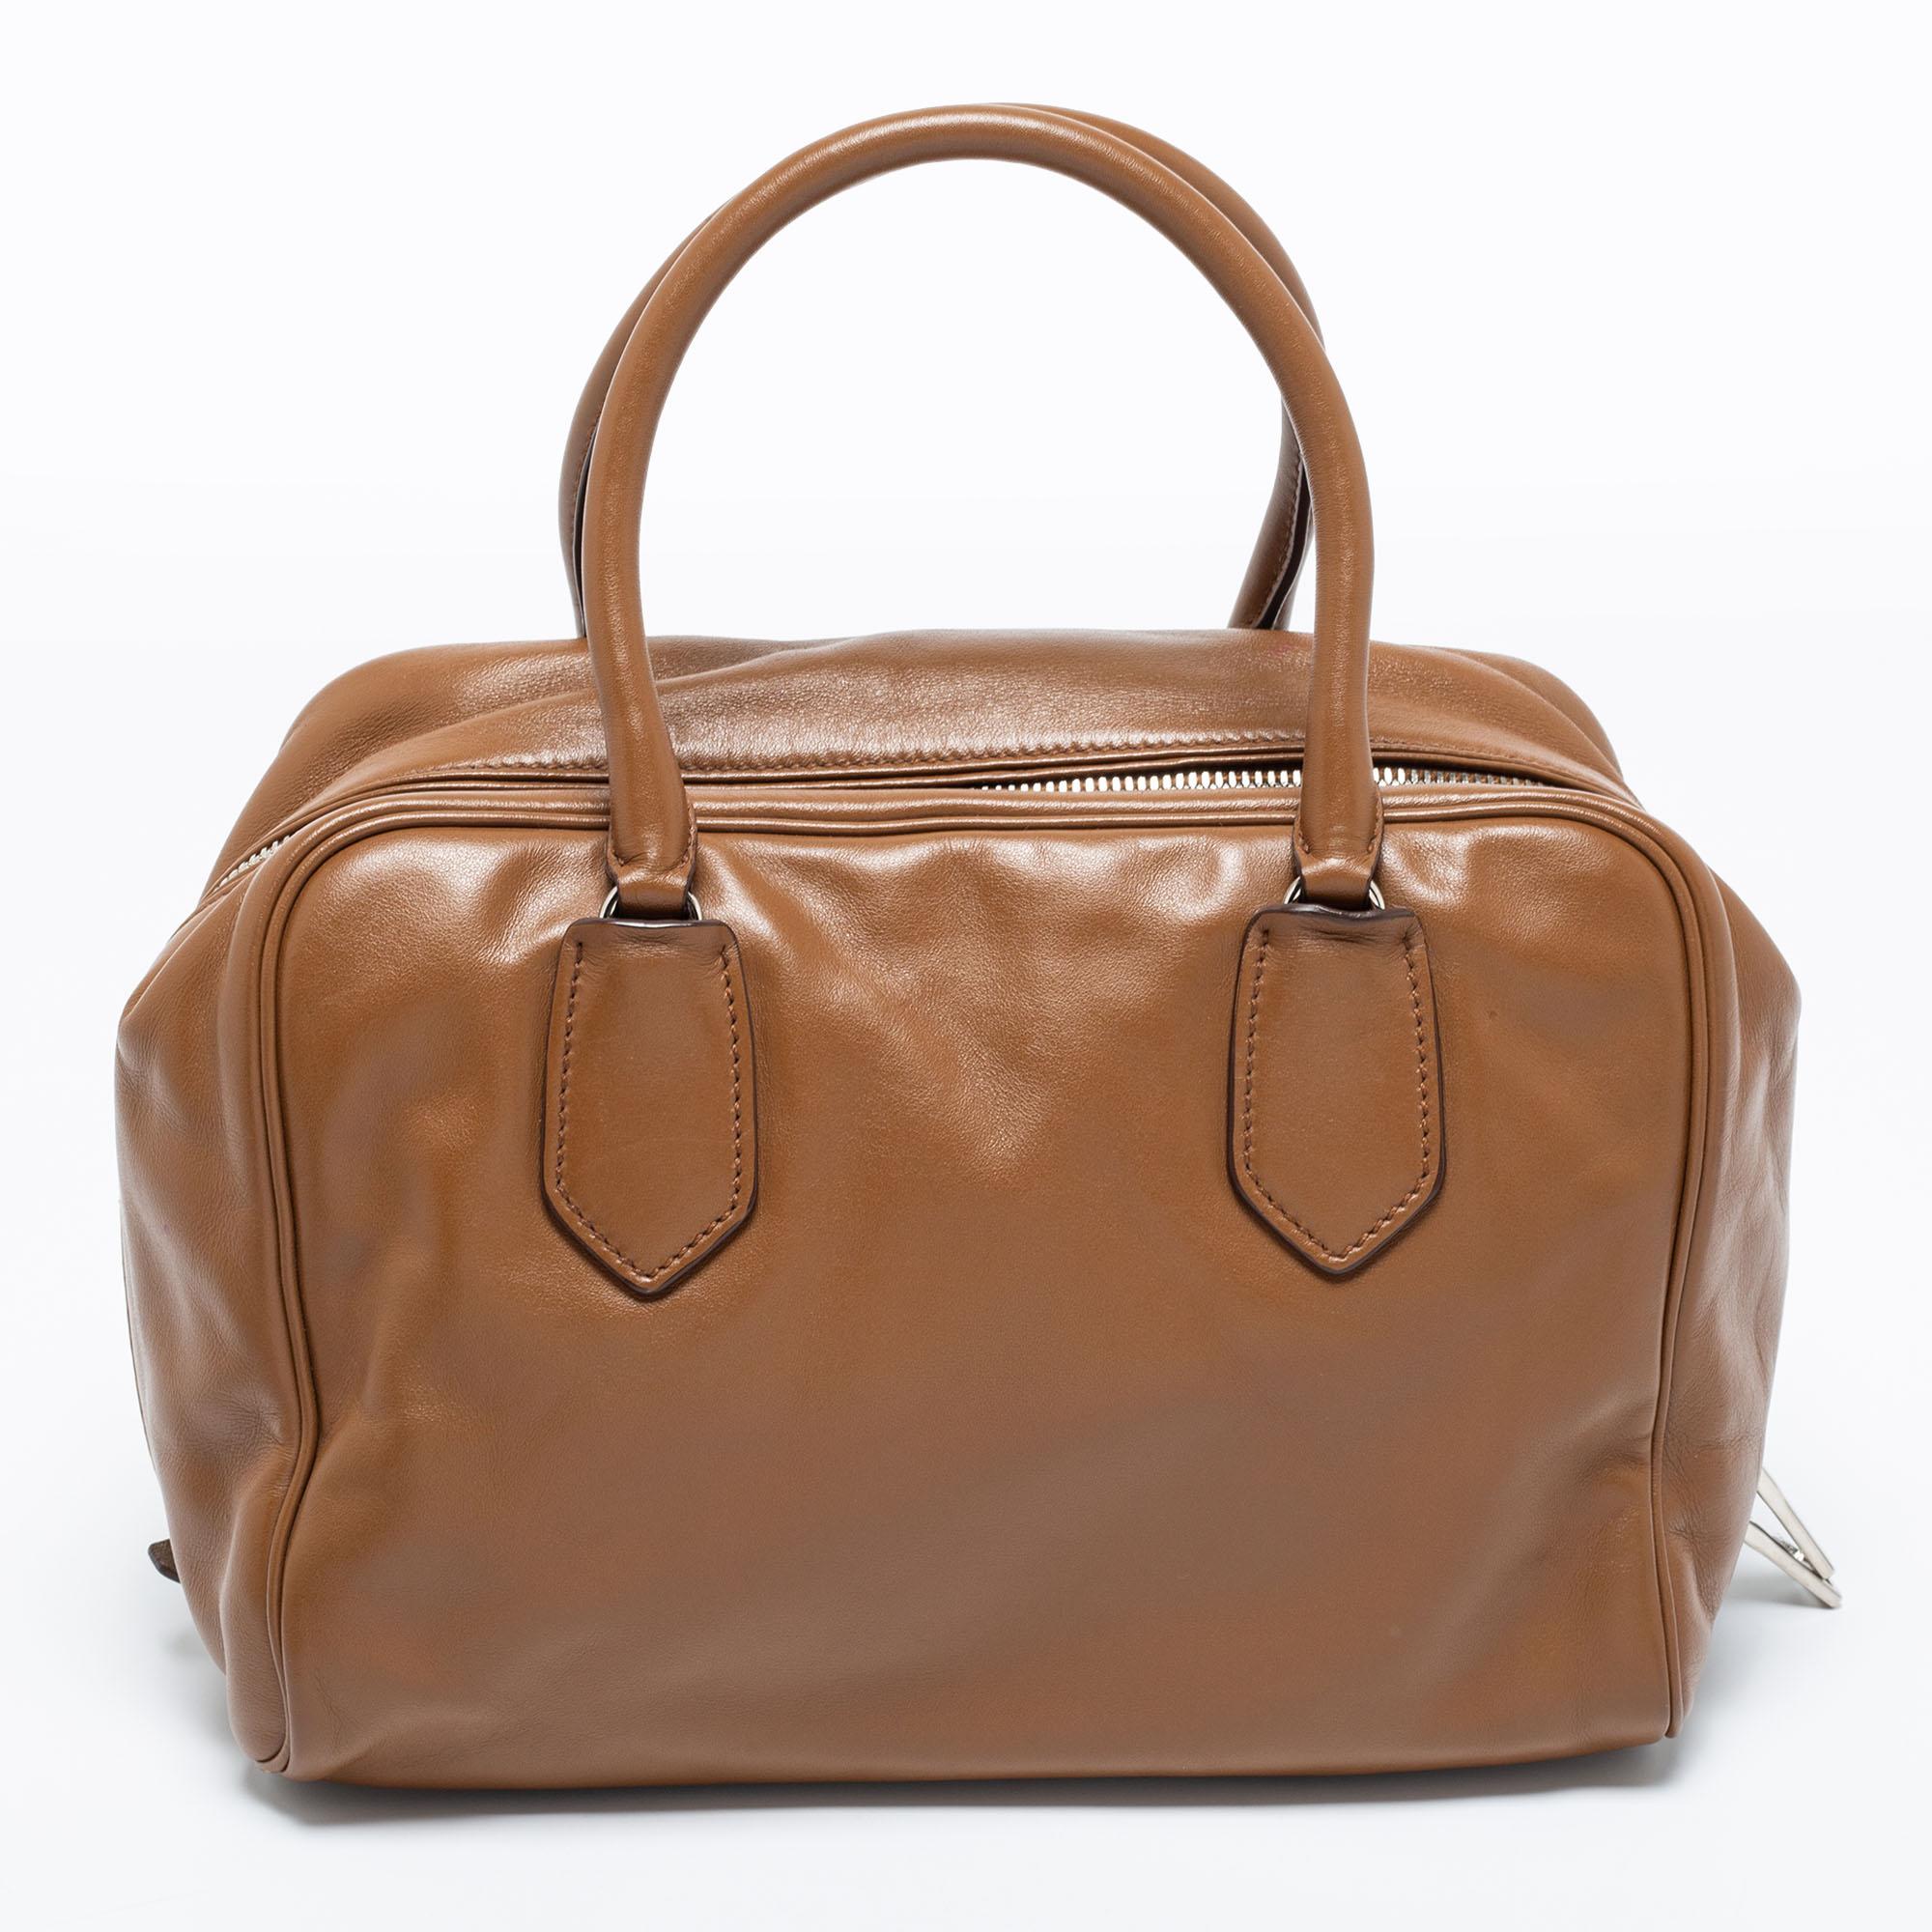 A perfect everyday bag to hold all that you need while being chic and of a practical size, this Prada bag is hard to miss. Crafted in brown-turquoise leather, this bag features a top zipper closure that opens to a capacious interior.

Includes: